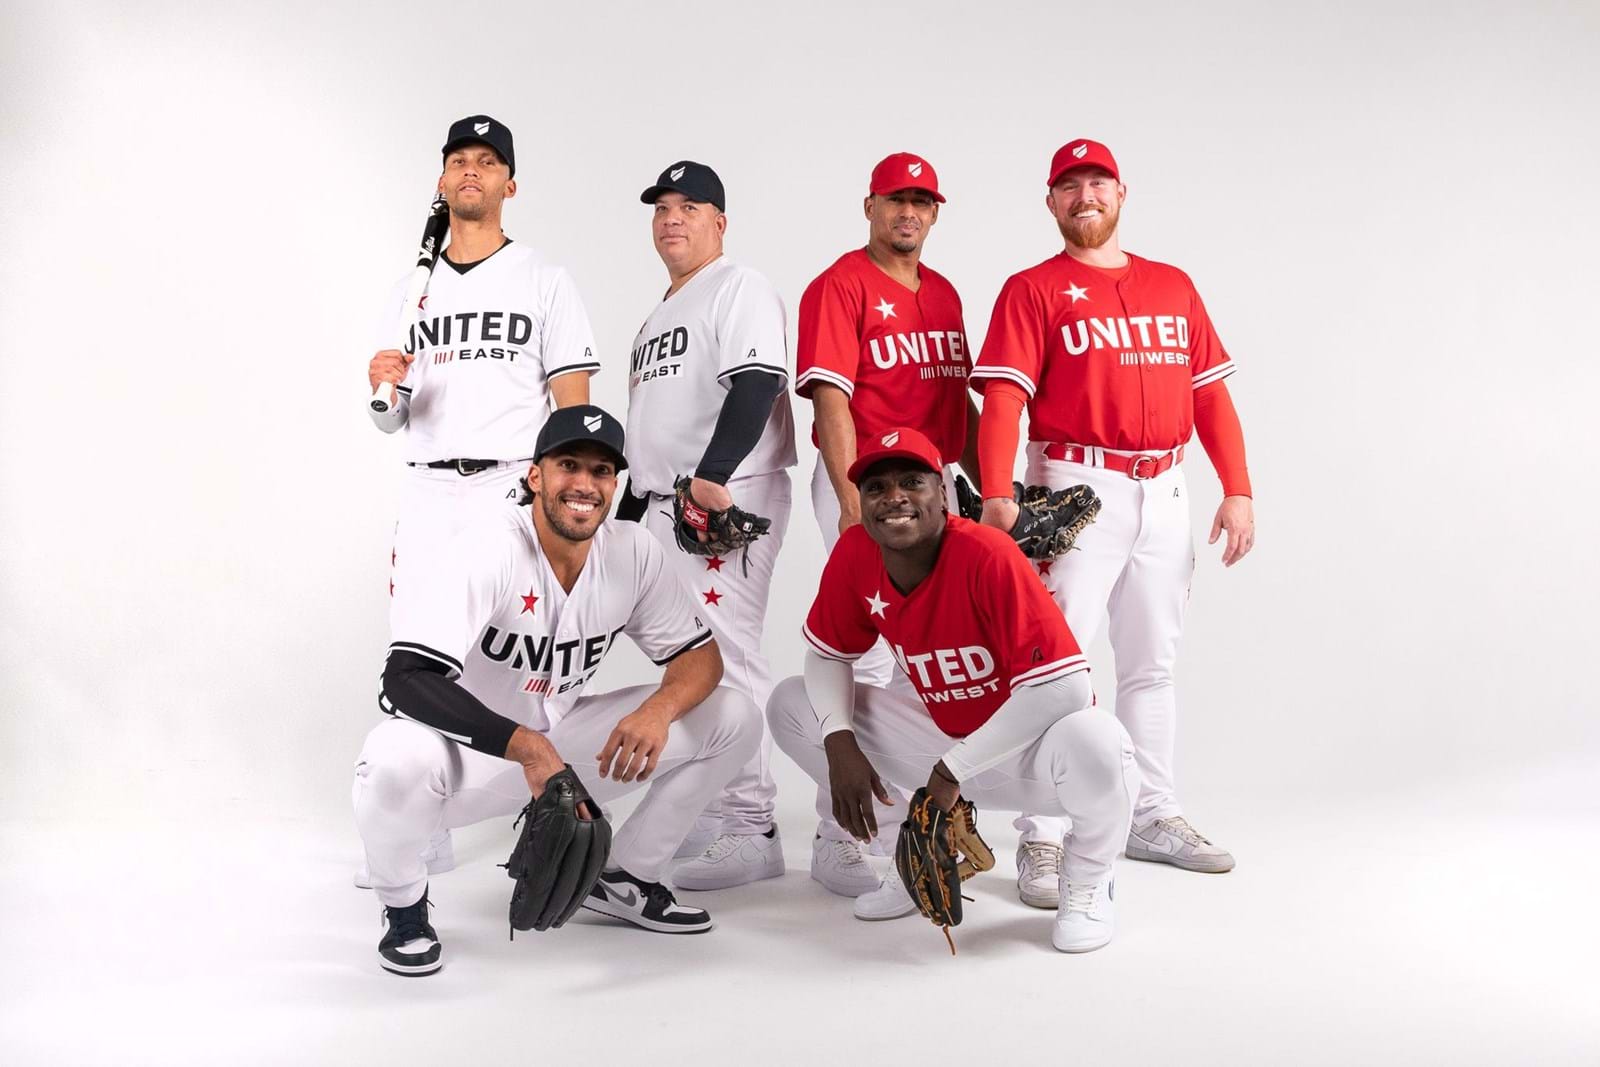 Sunset+Vine partners with Baseball United to broadcast inaugural showcase event